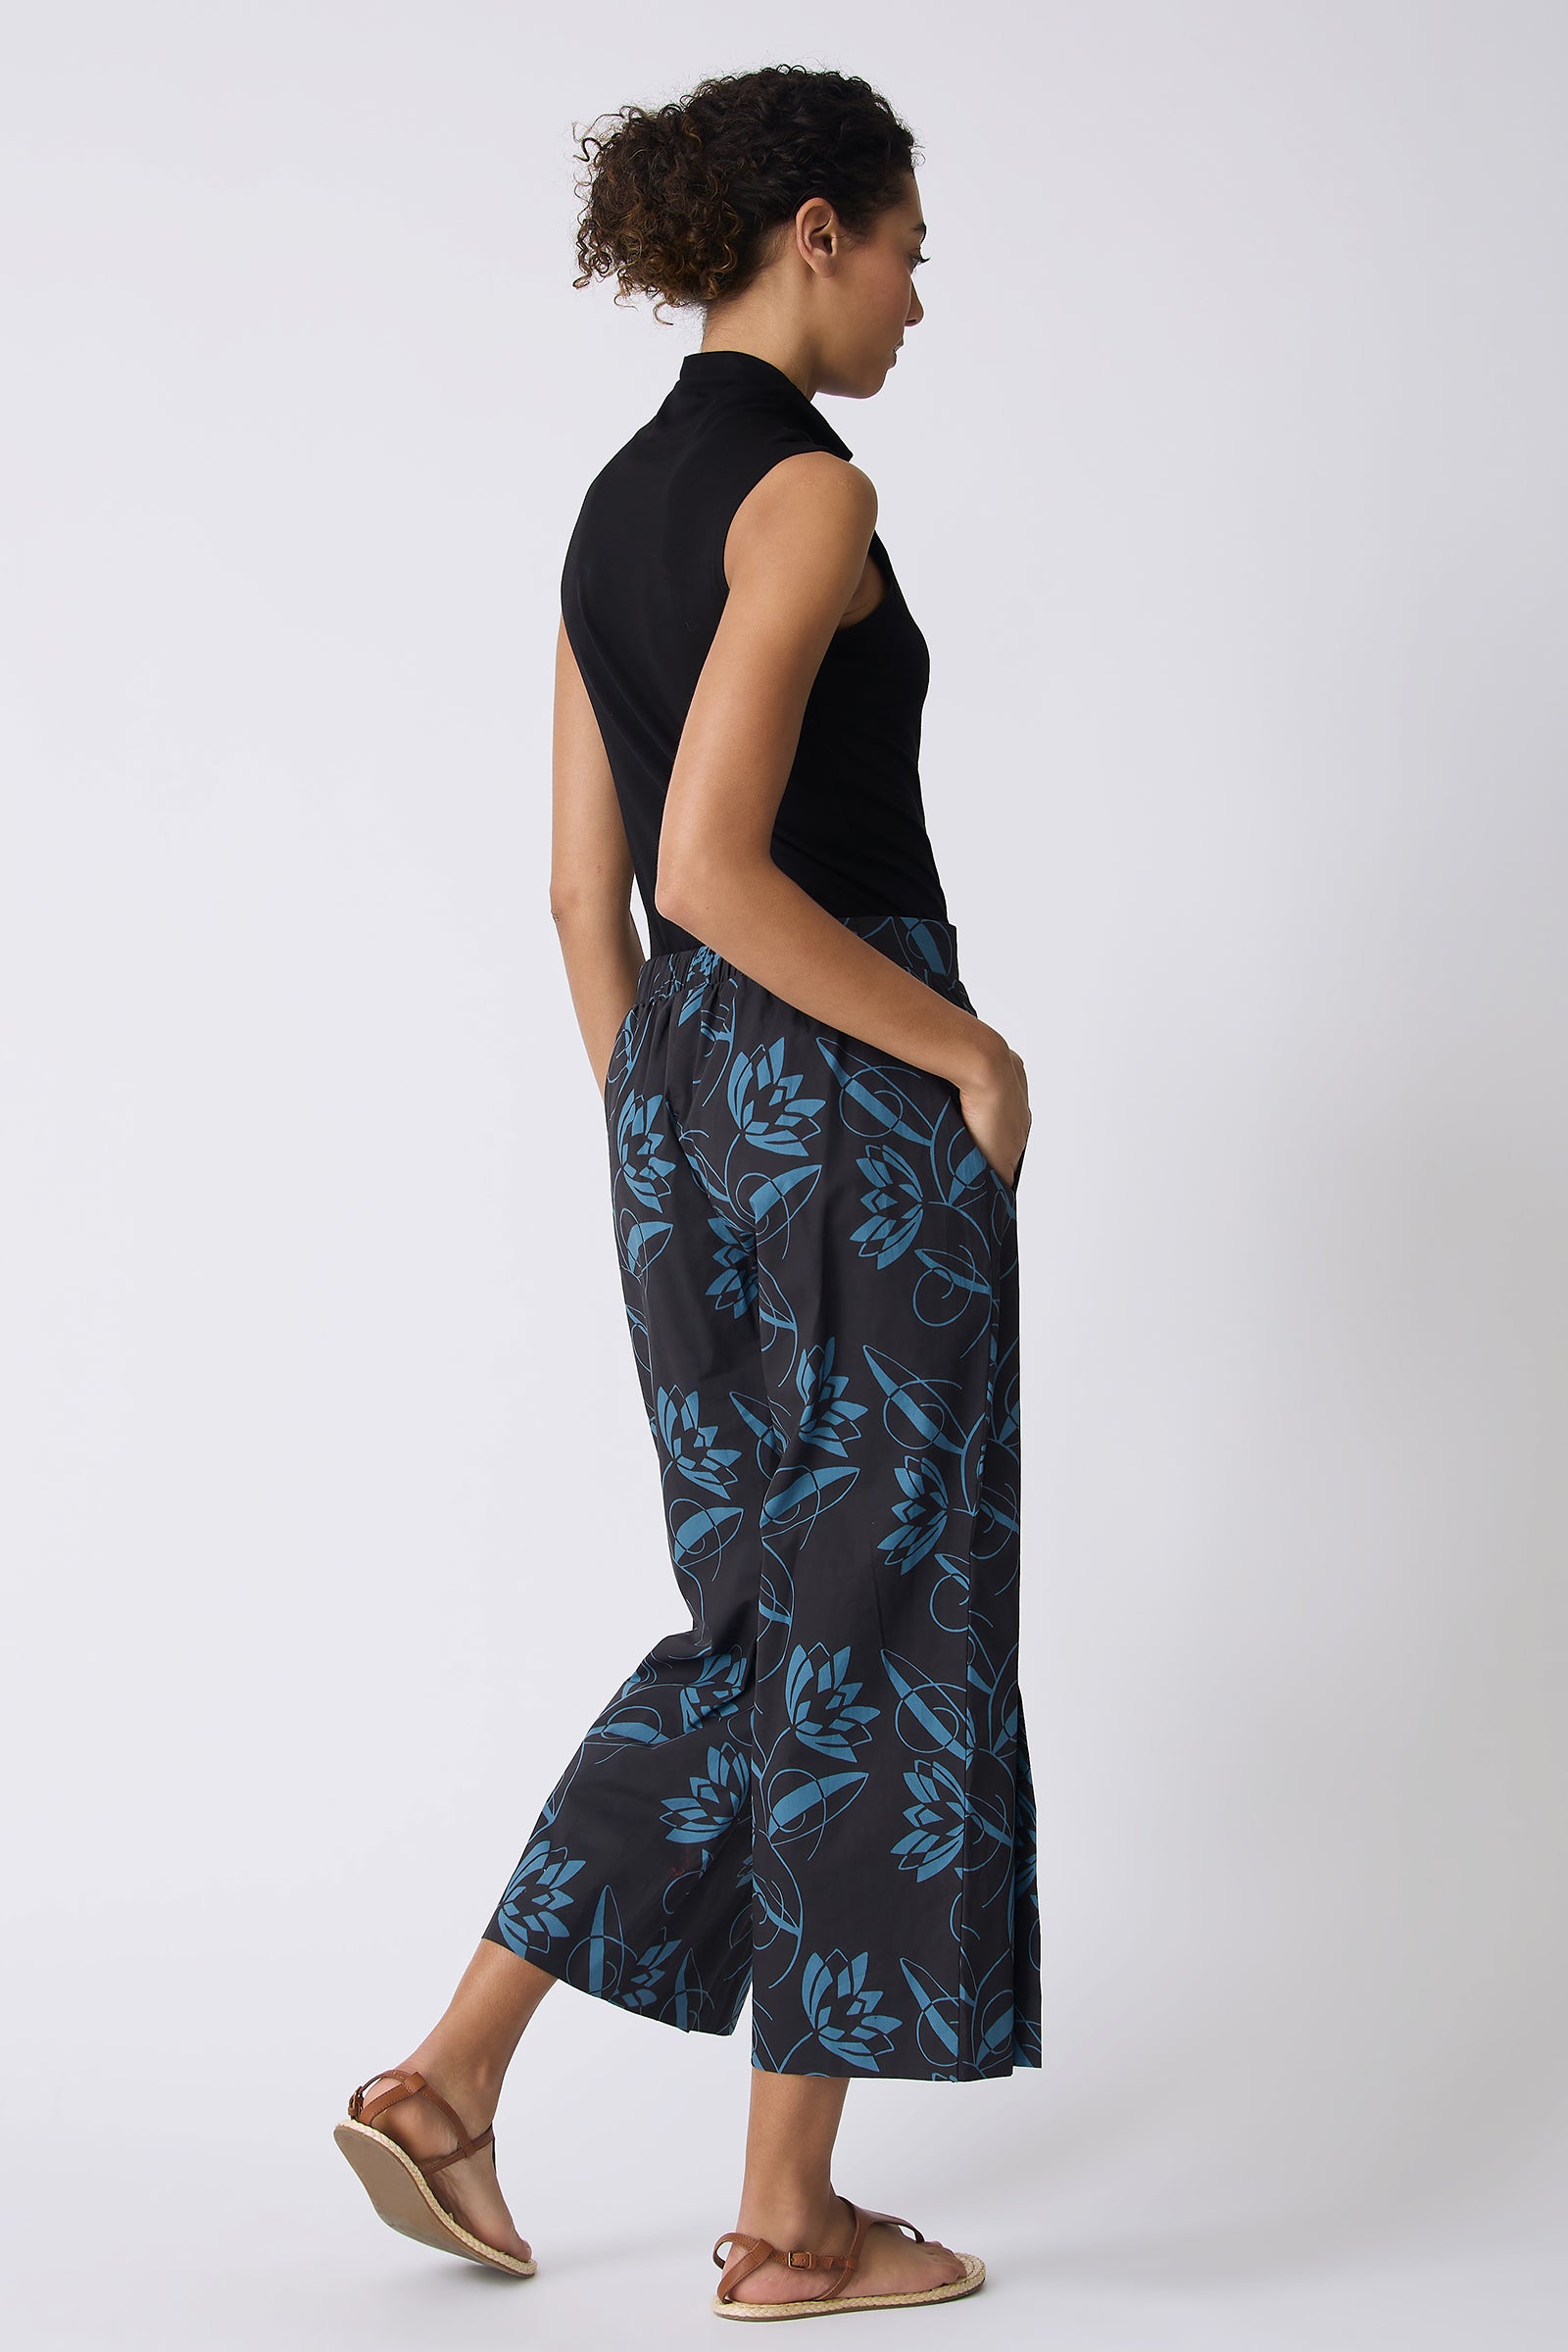 Kal Rieman Tami Side Kick Pant in Lotus Print Blue on model with left hand on hip